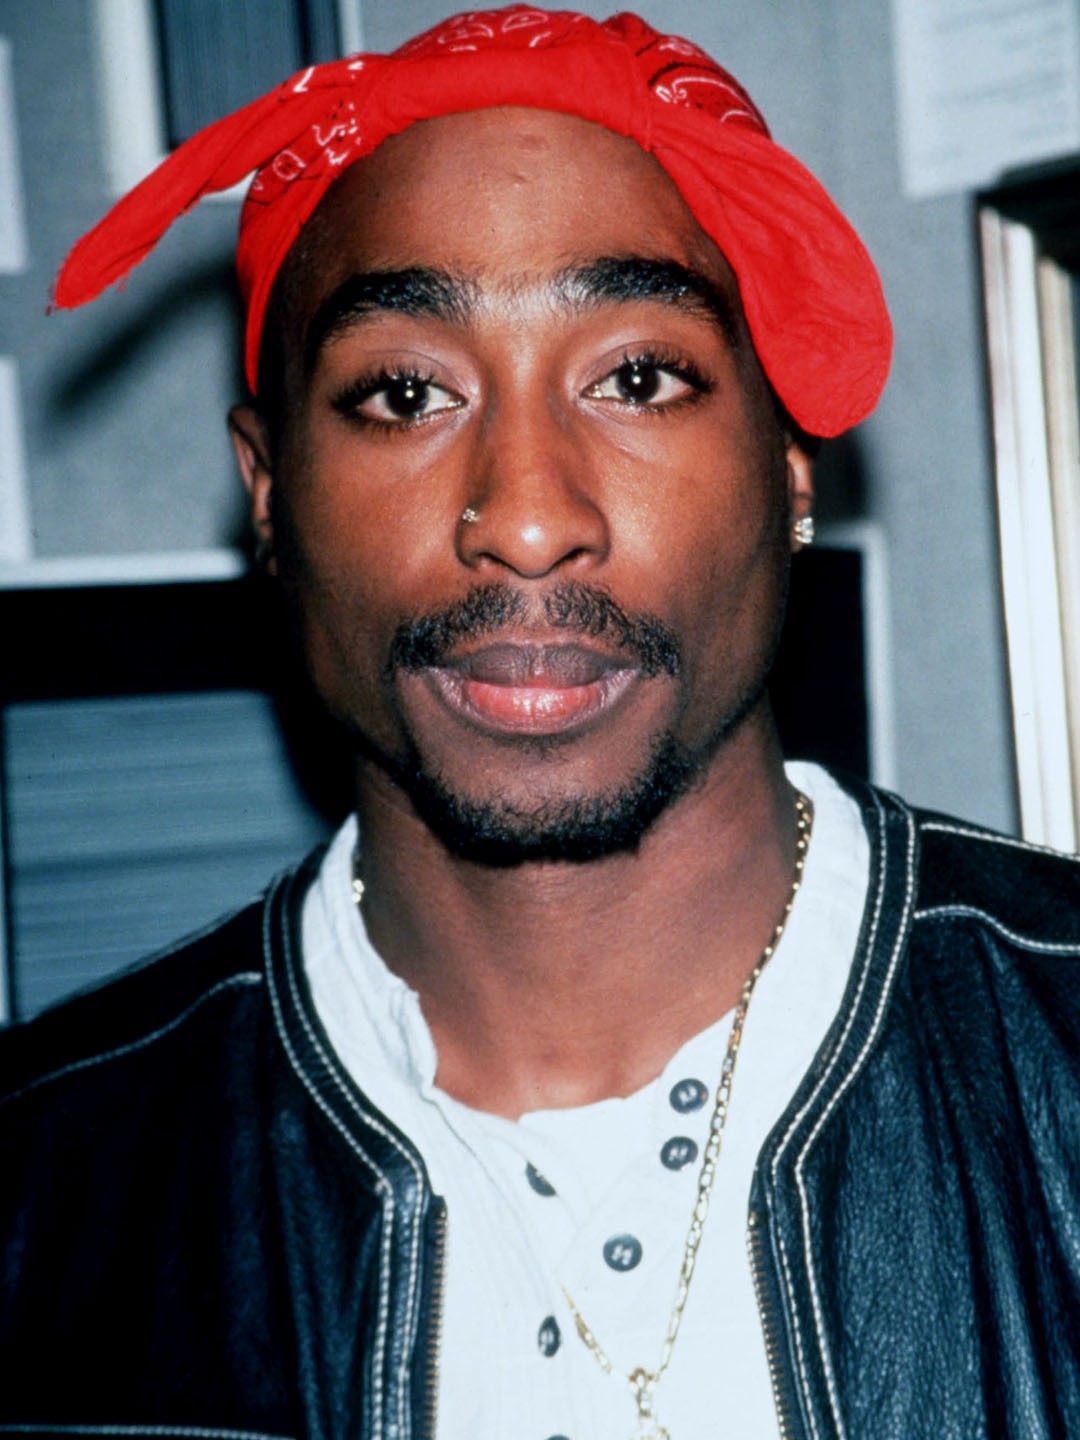 2Pac's most iconic interviews, Vol. 1